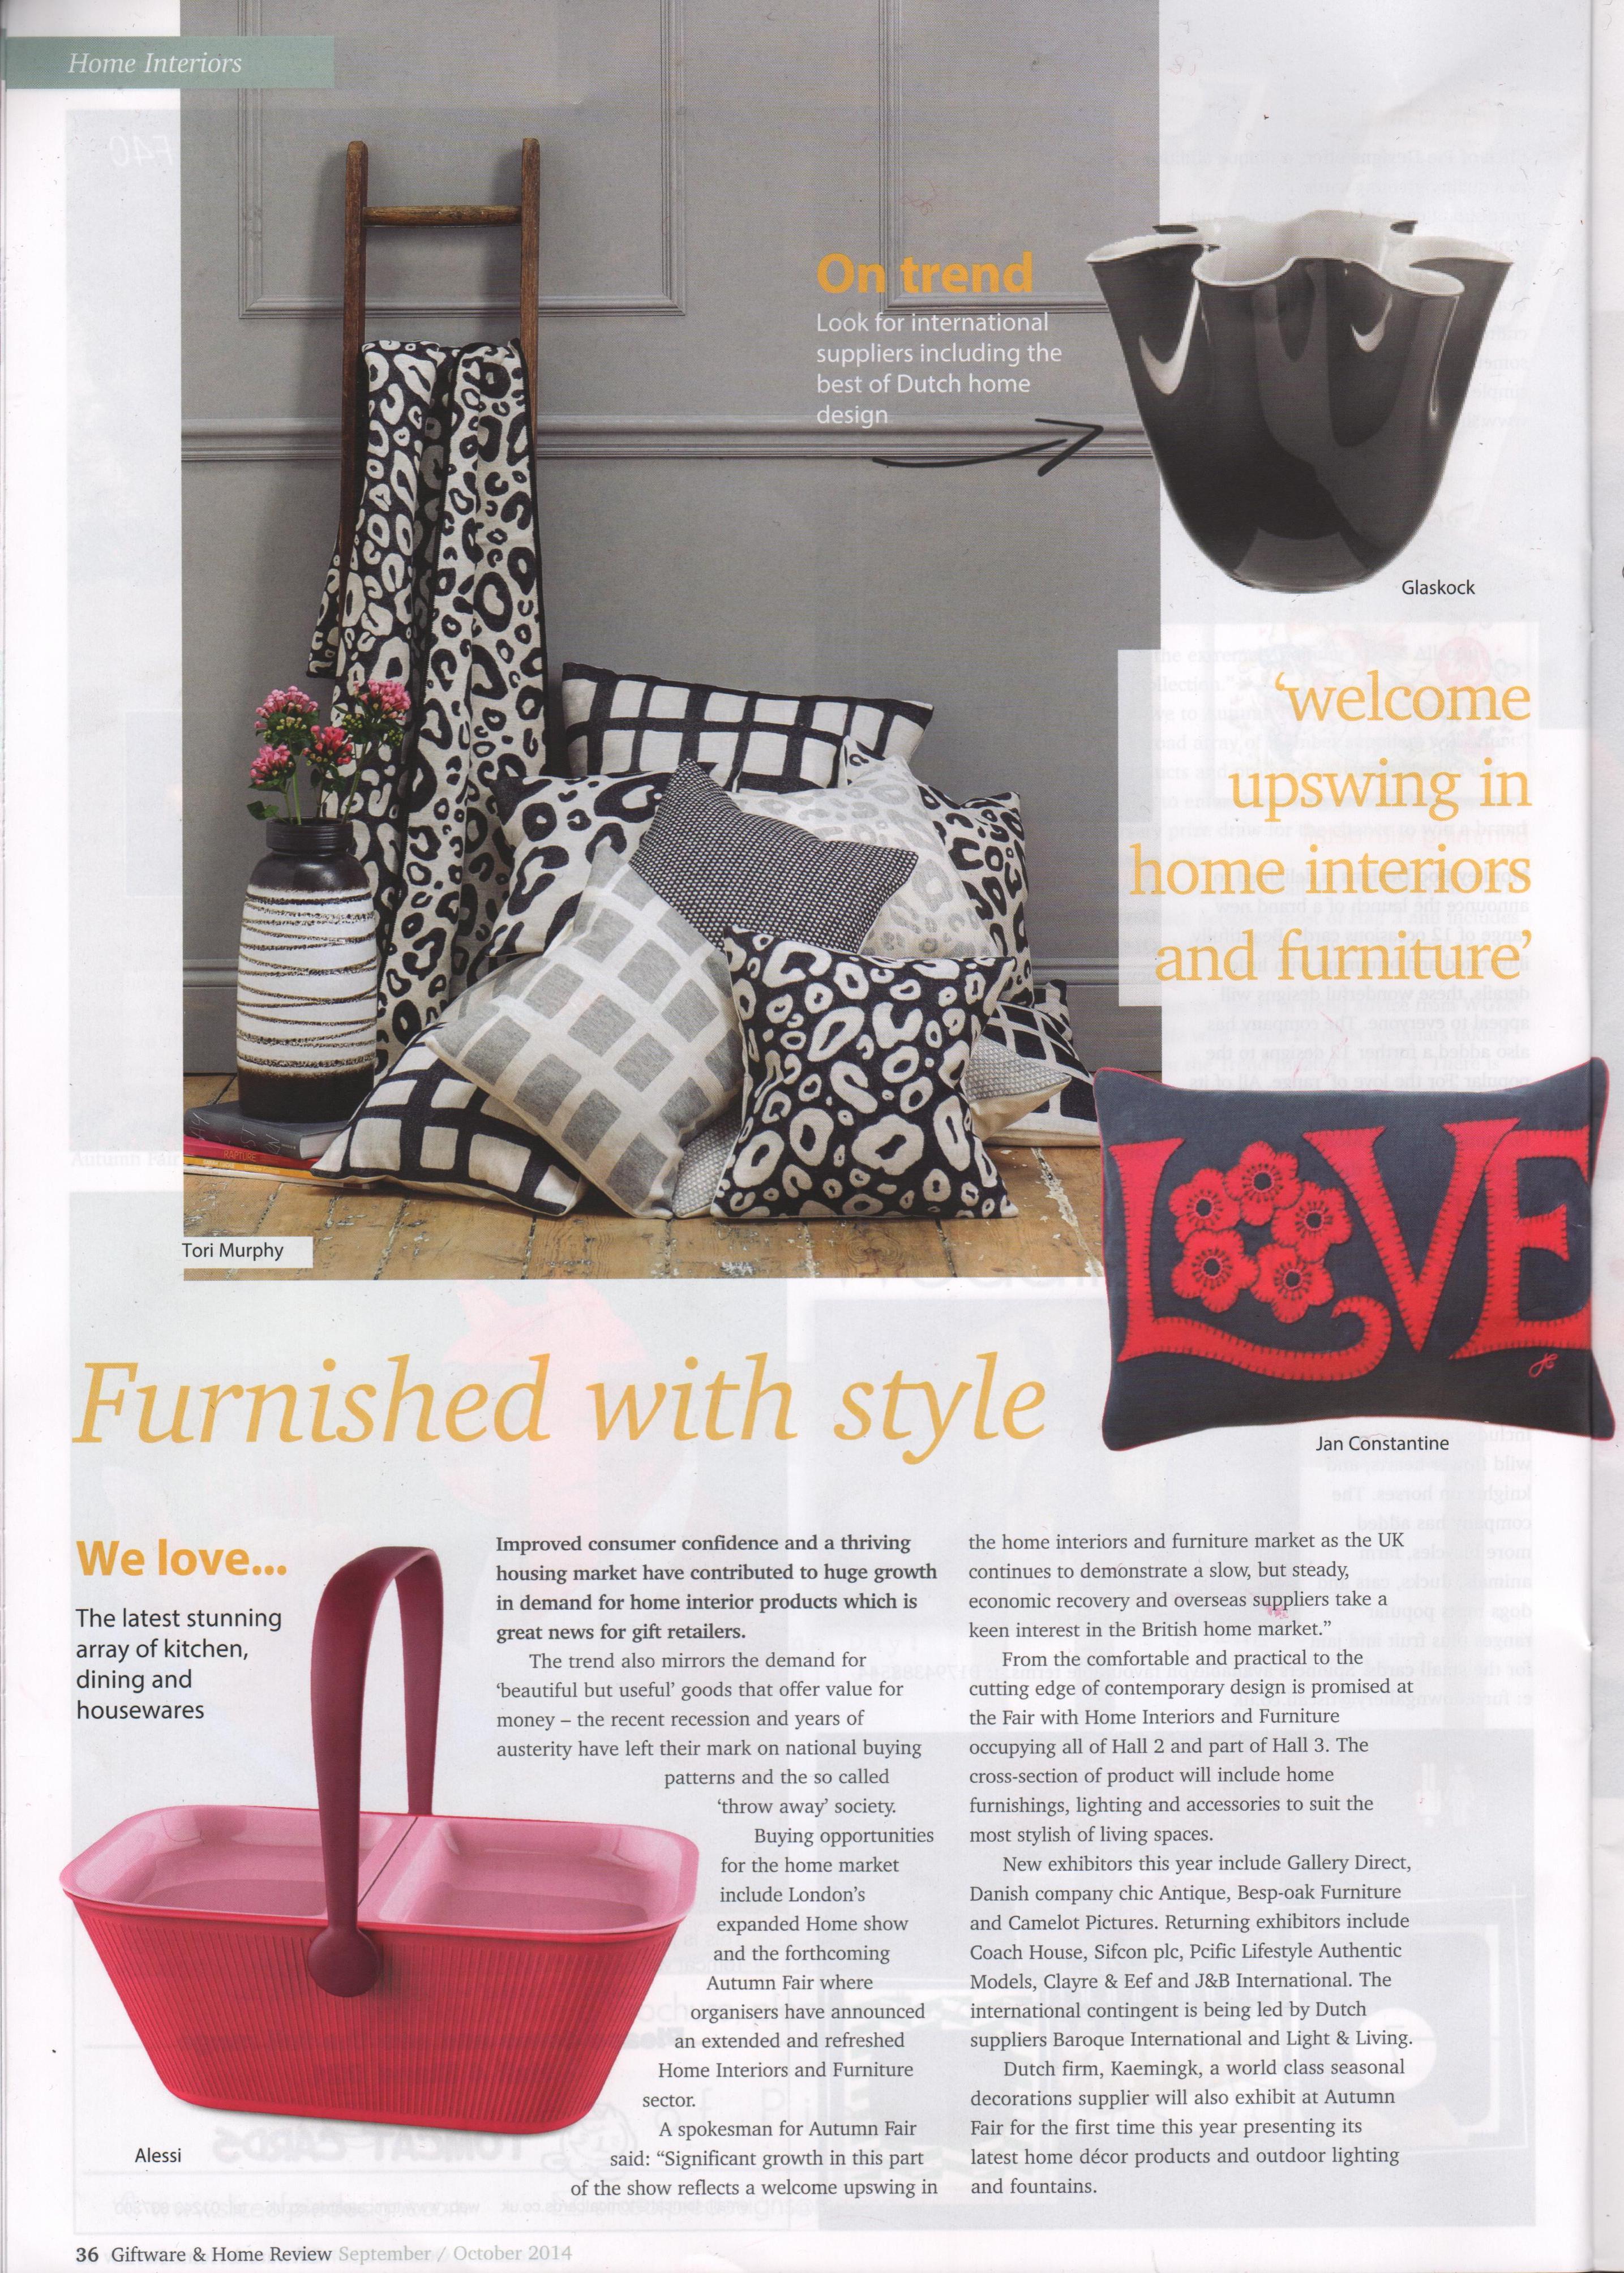 giftware-and-home-review-sept-oct-2014.jpg